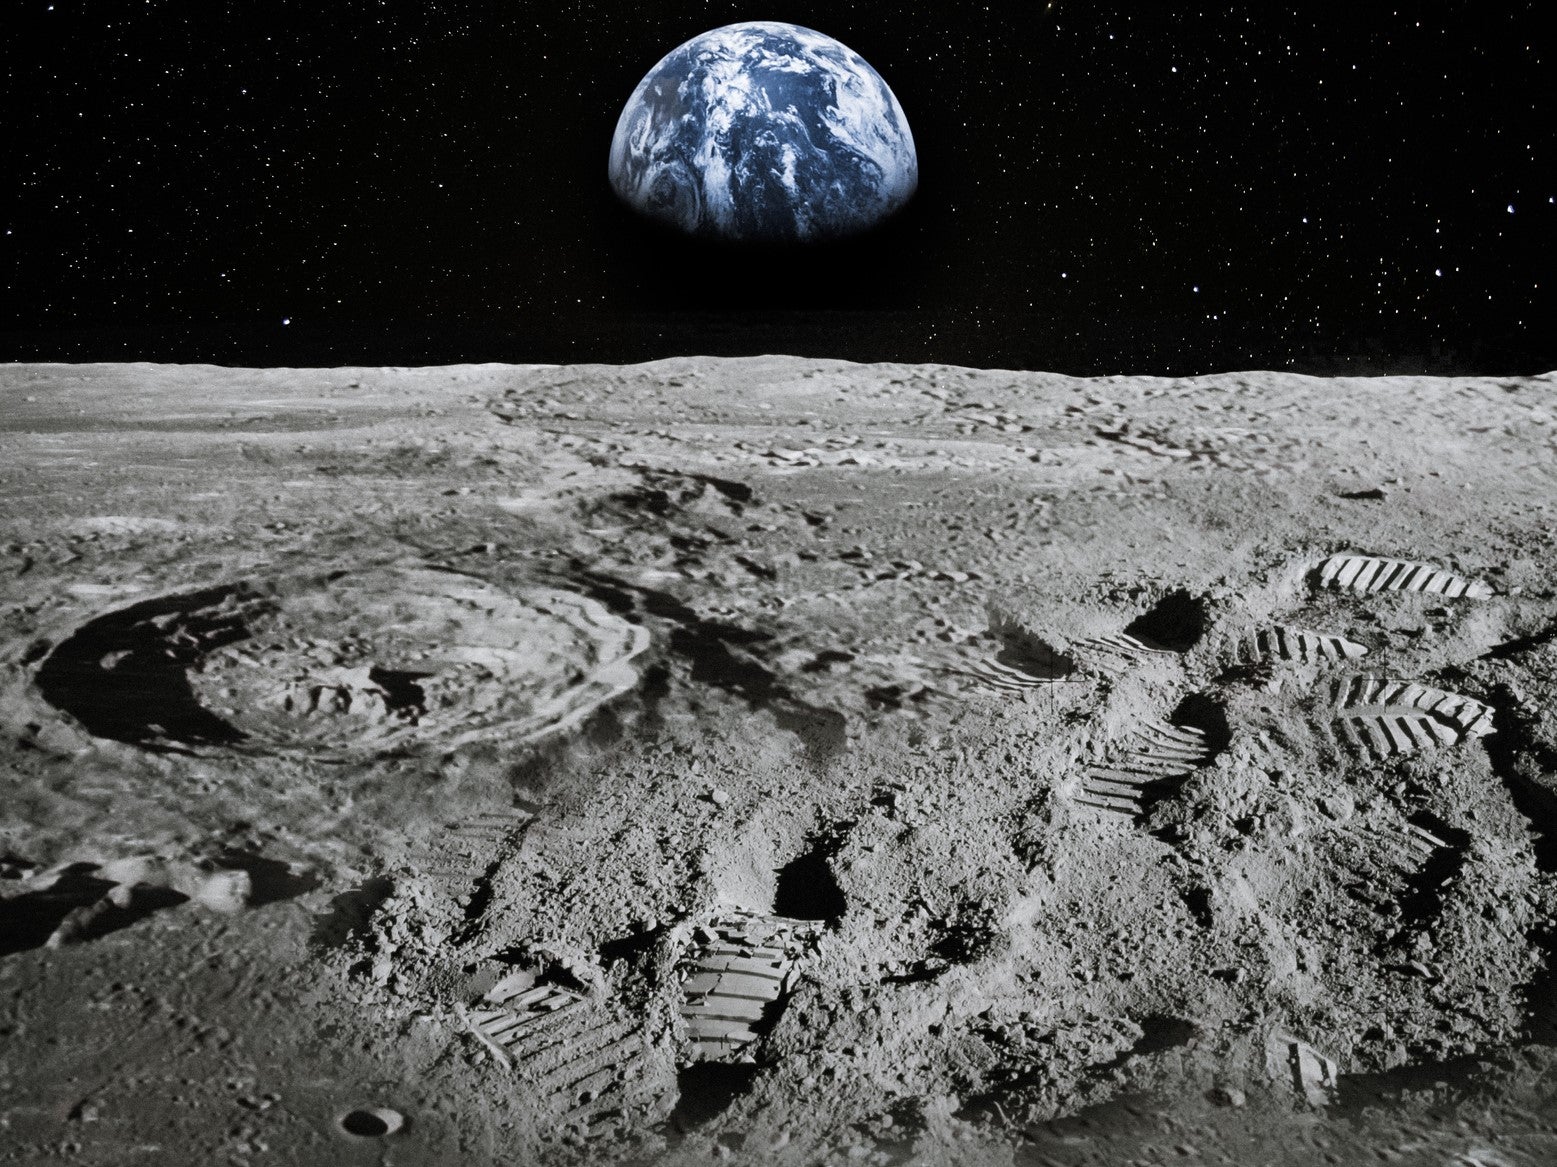 NASA Moon News - Mubasher: The announcement of a mysterious "new discovery"  is revealed today